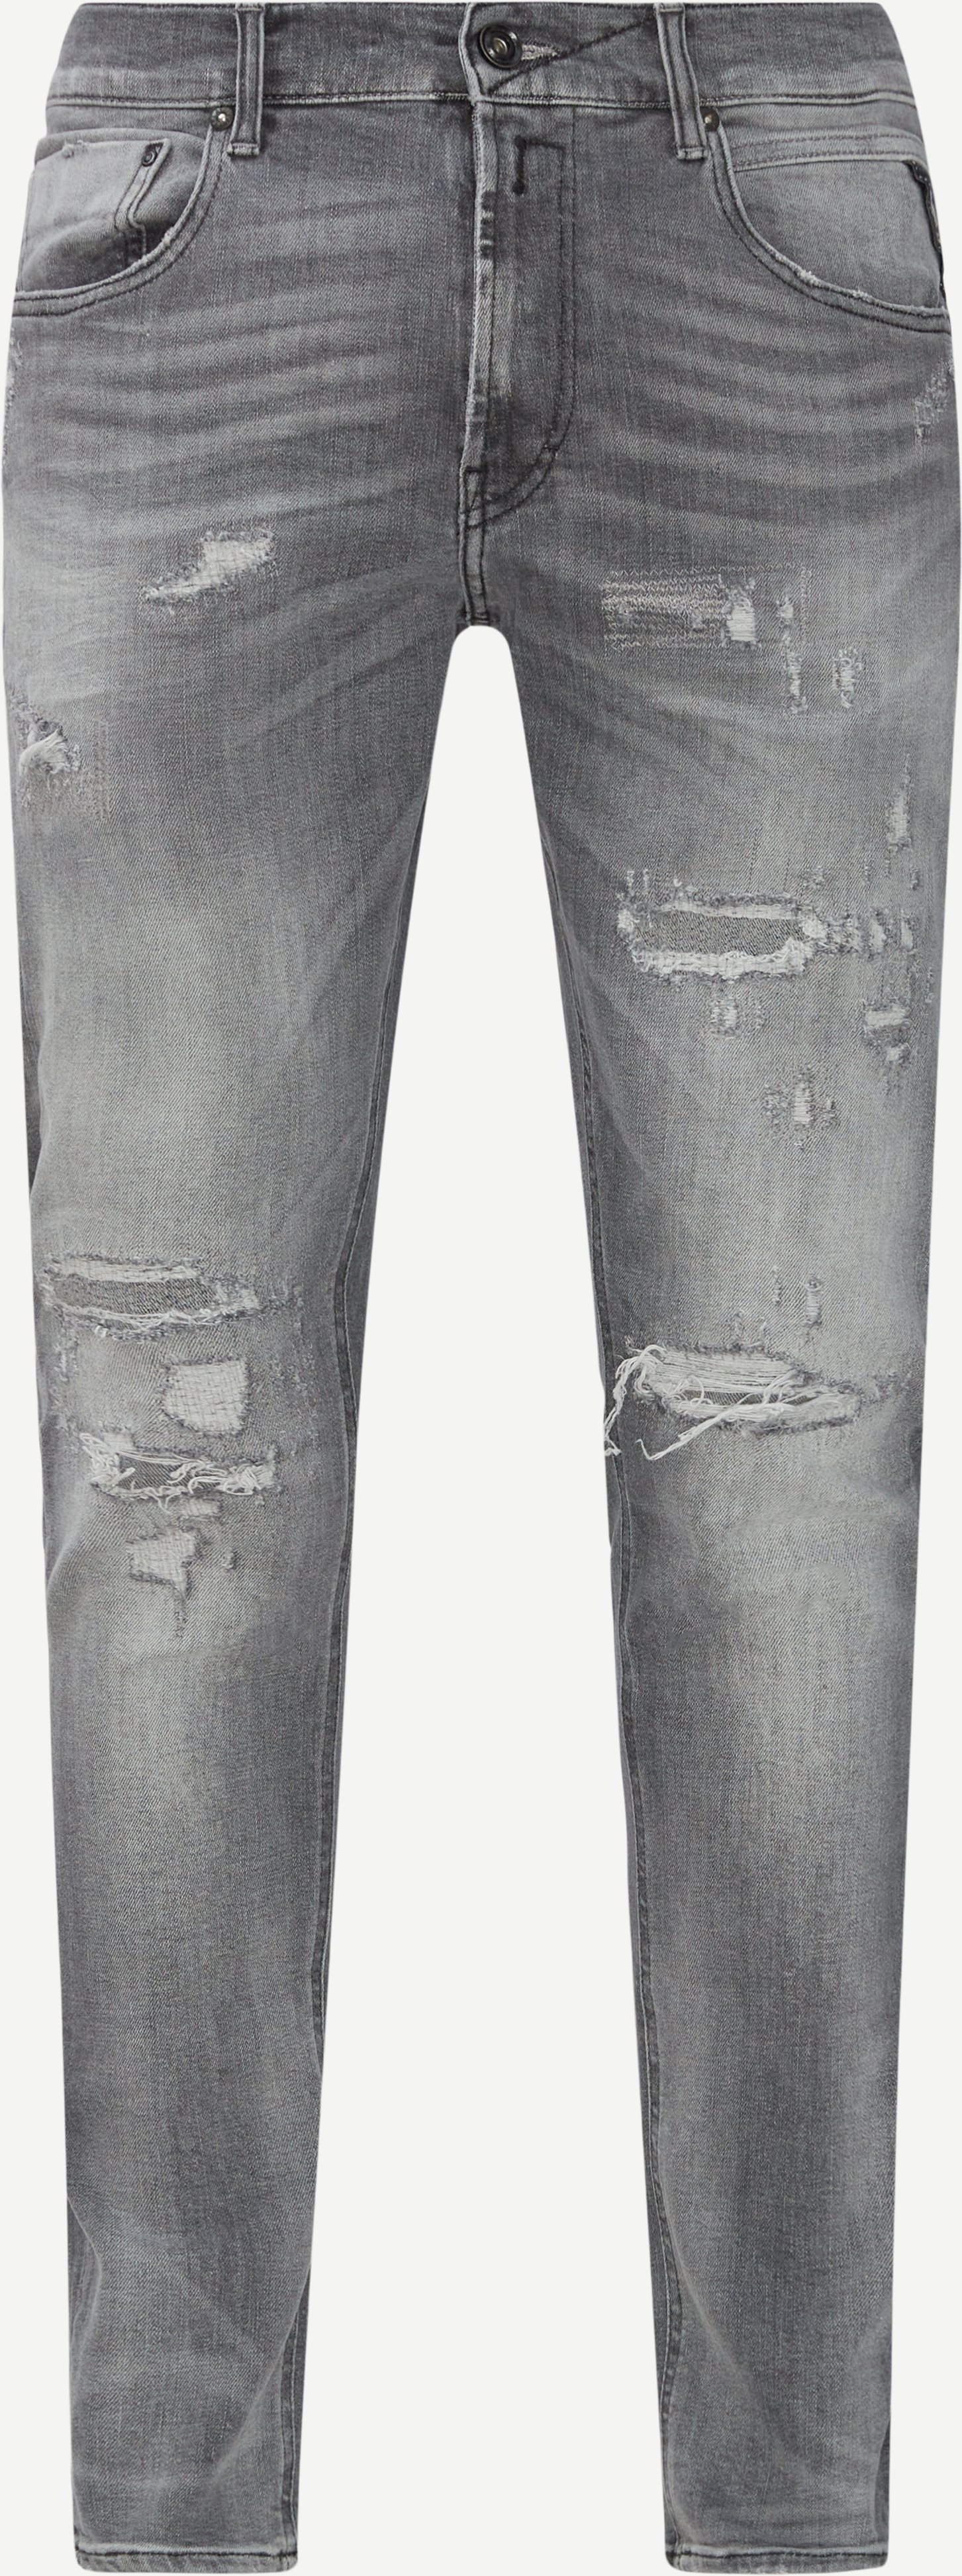 M1021Q Aged 20 Years Mickym Jeans - Jeans - Slim fit - Grå